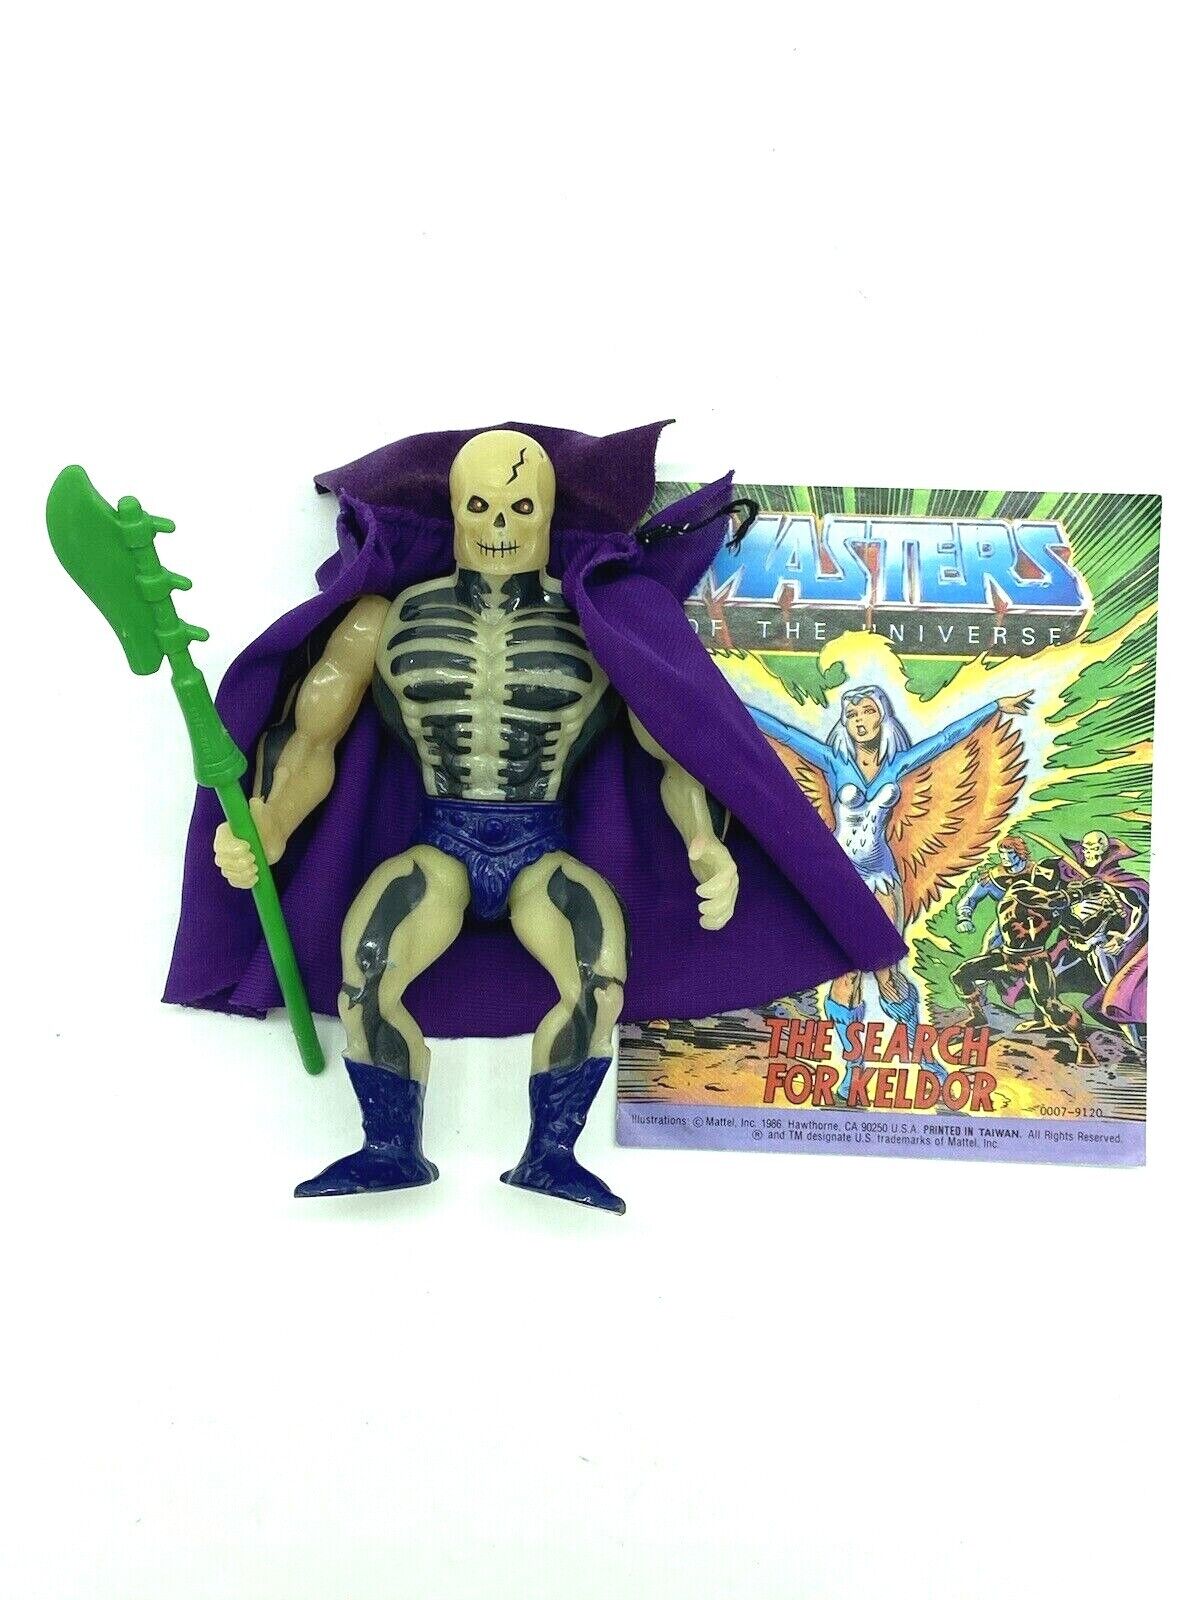 He-Man Scareglow figure complete with cape, weapon and comic